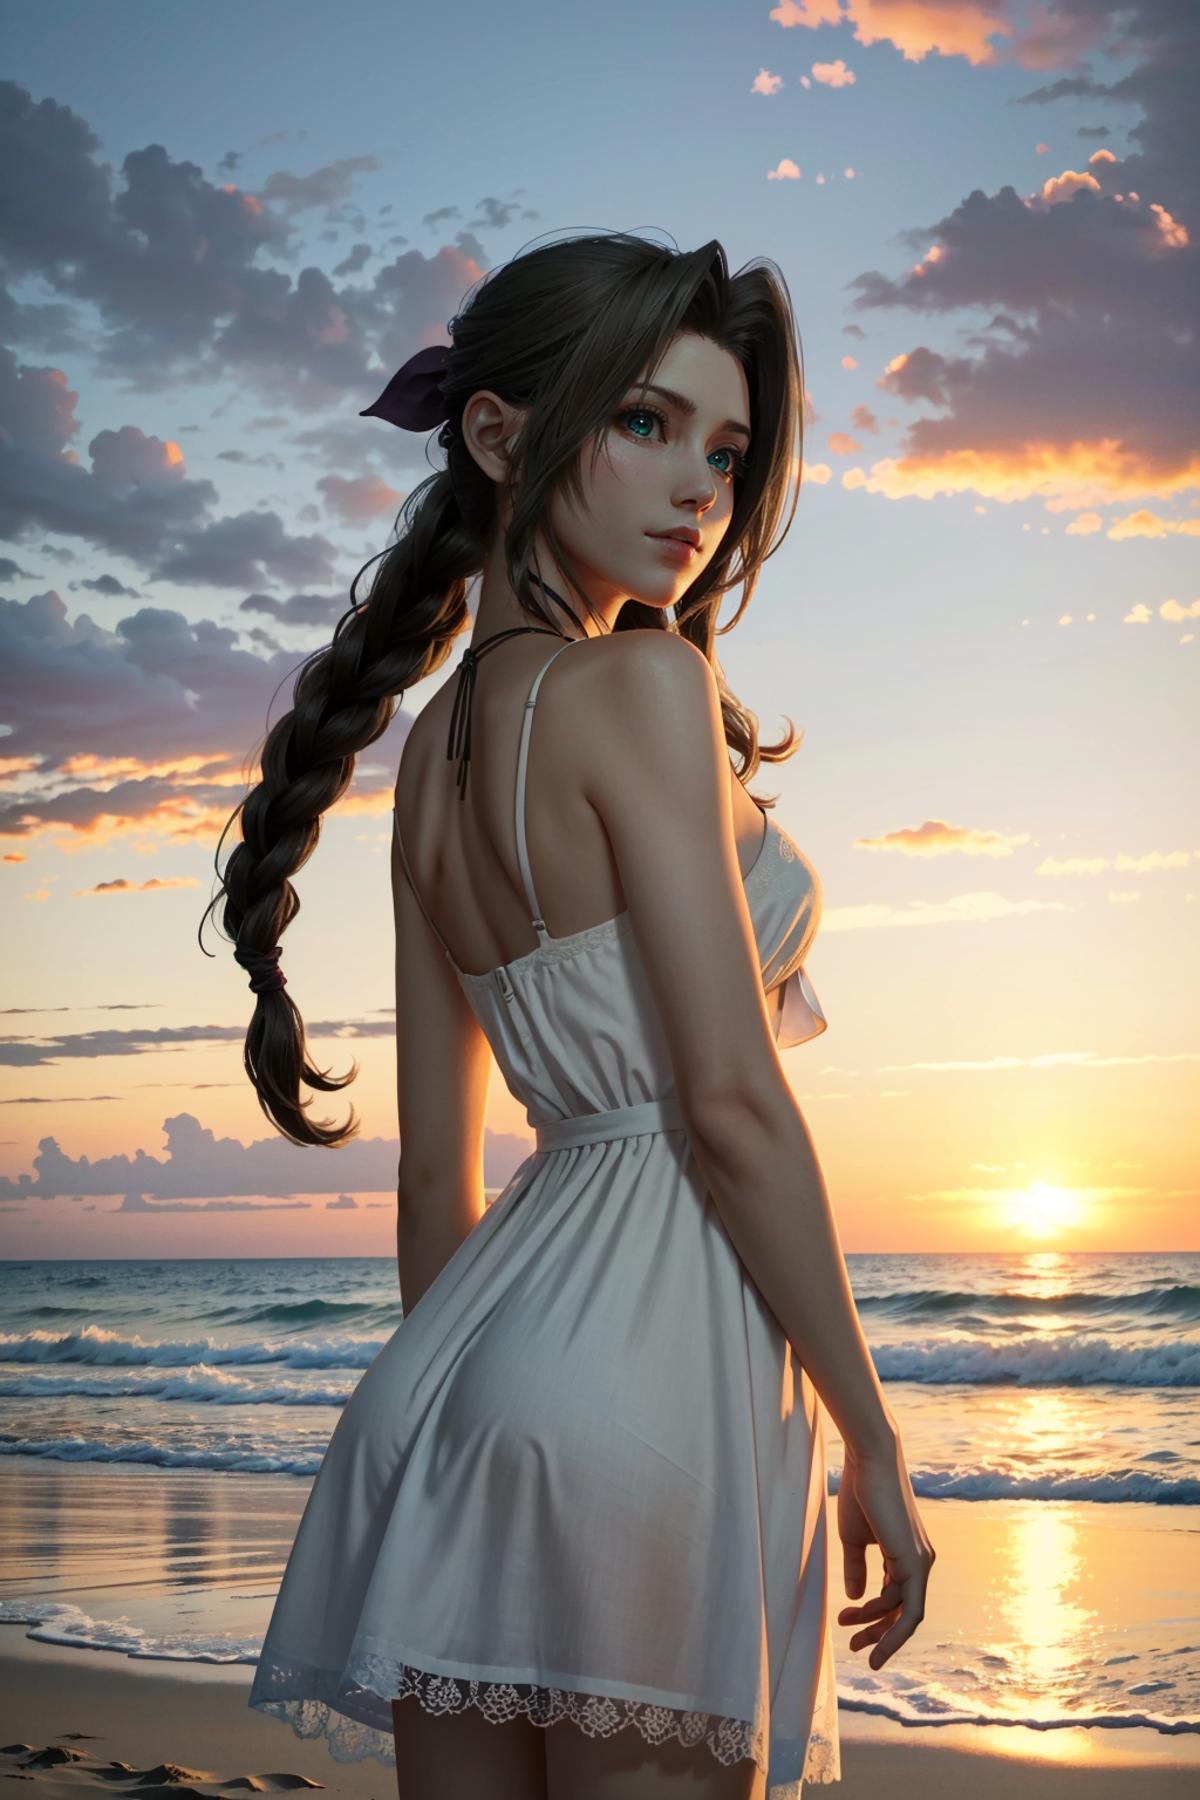 Aerith from Final Fantasy 7 image by BloodRedKittie